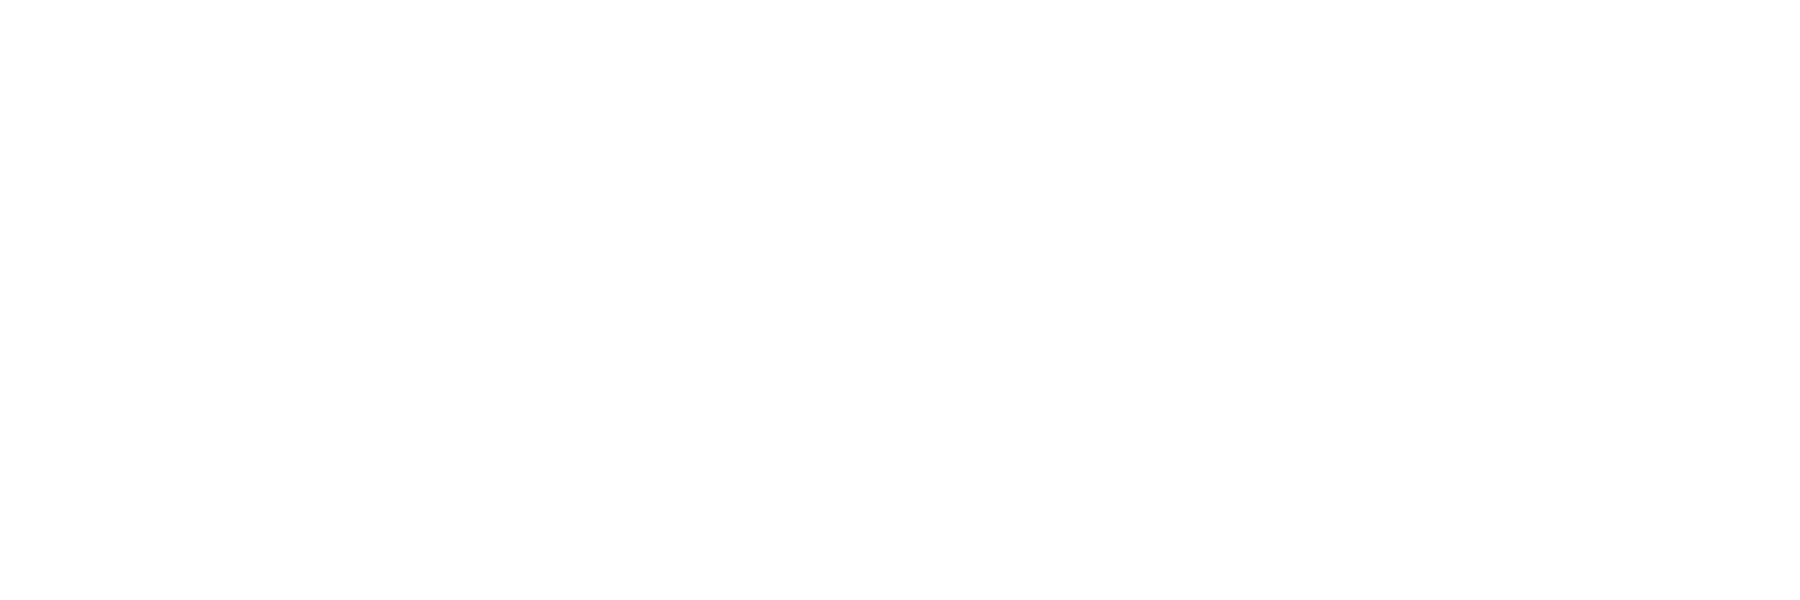 NWCCD Student Self-Service